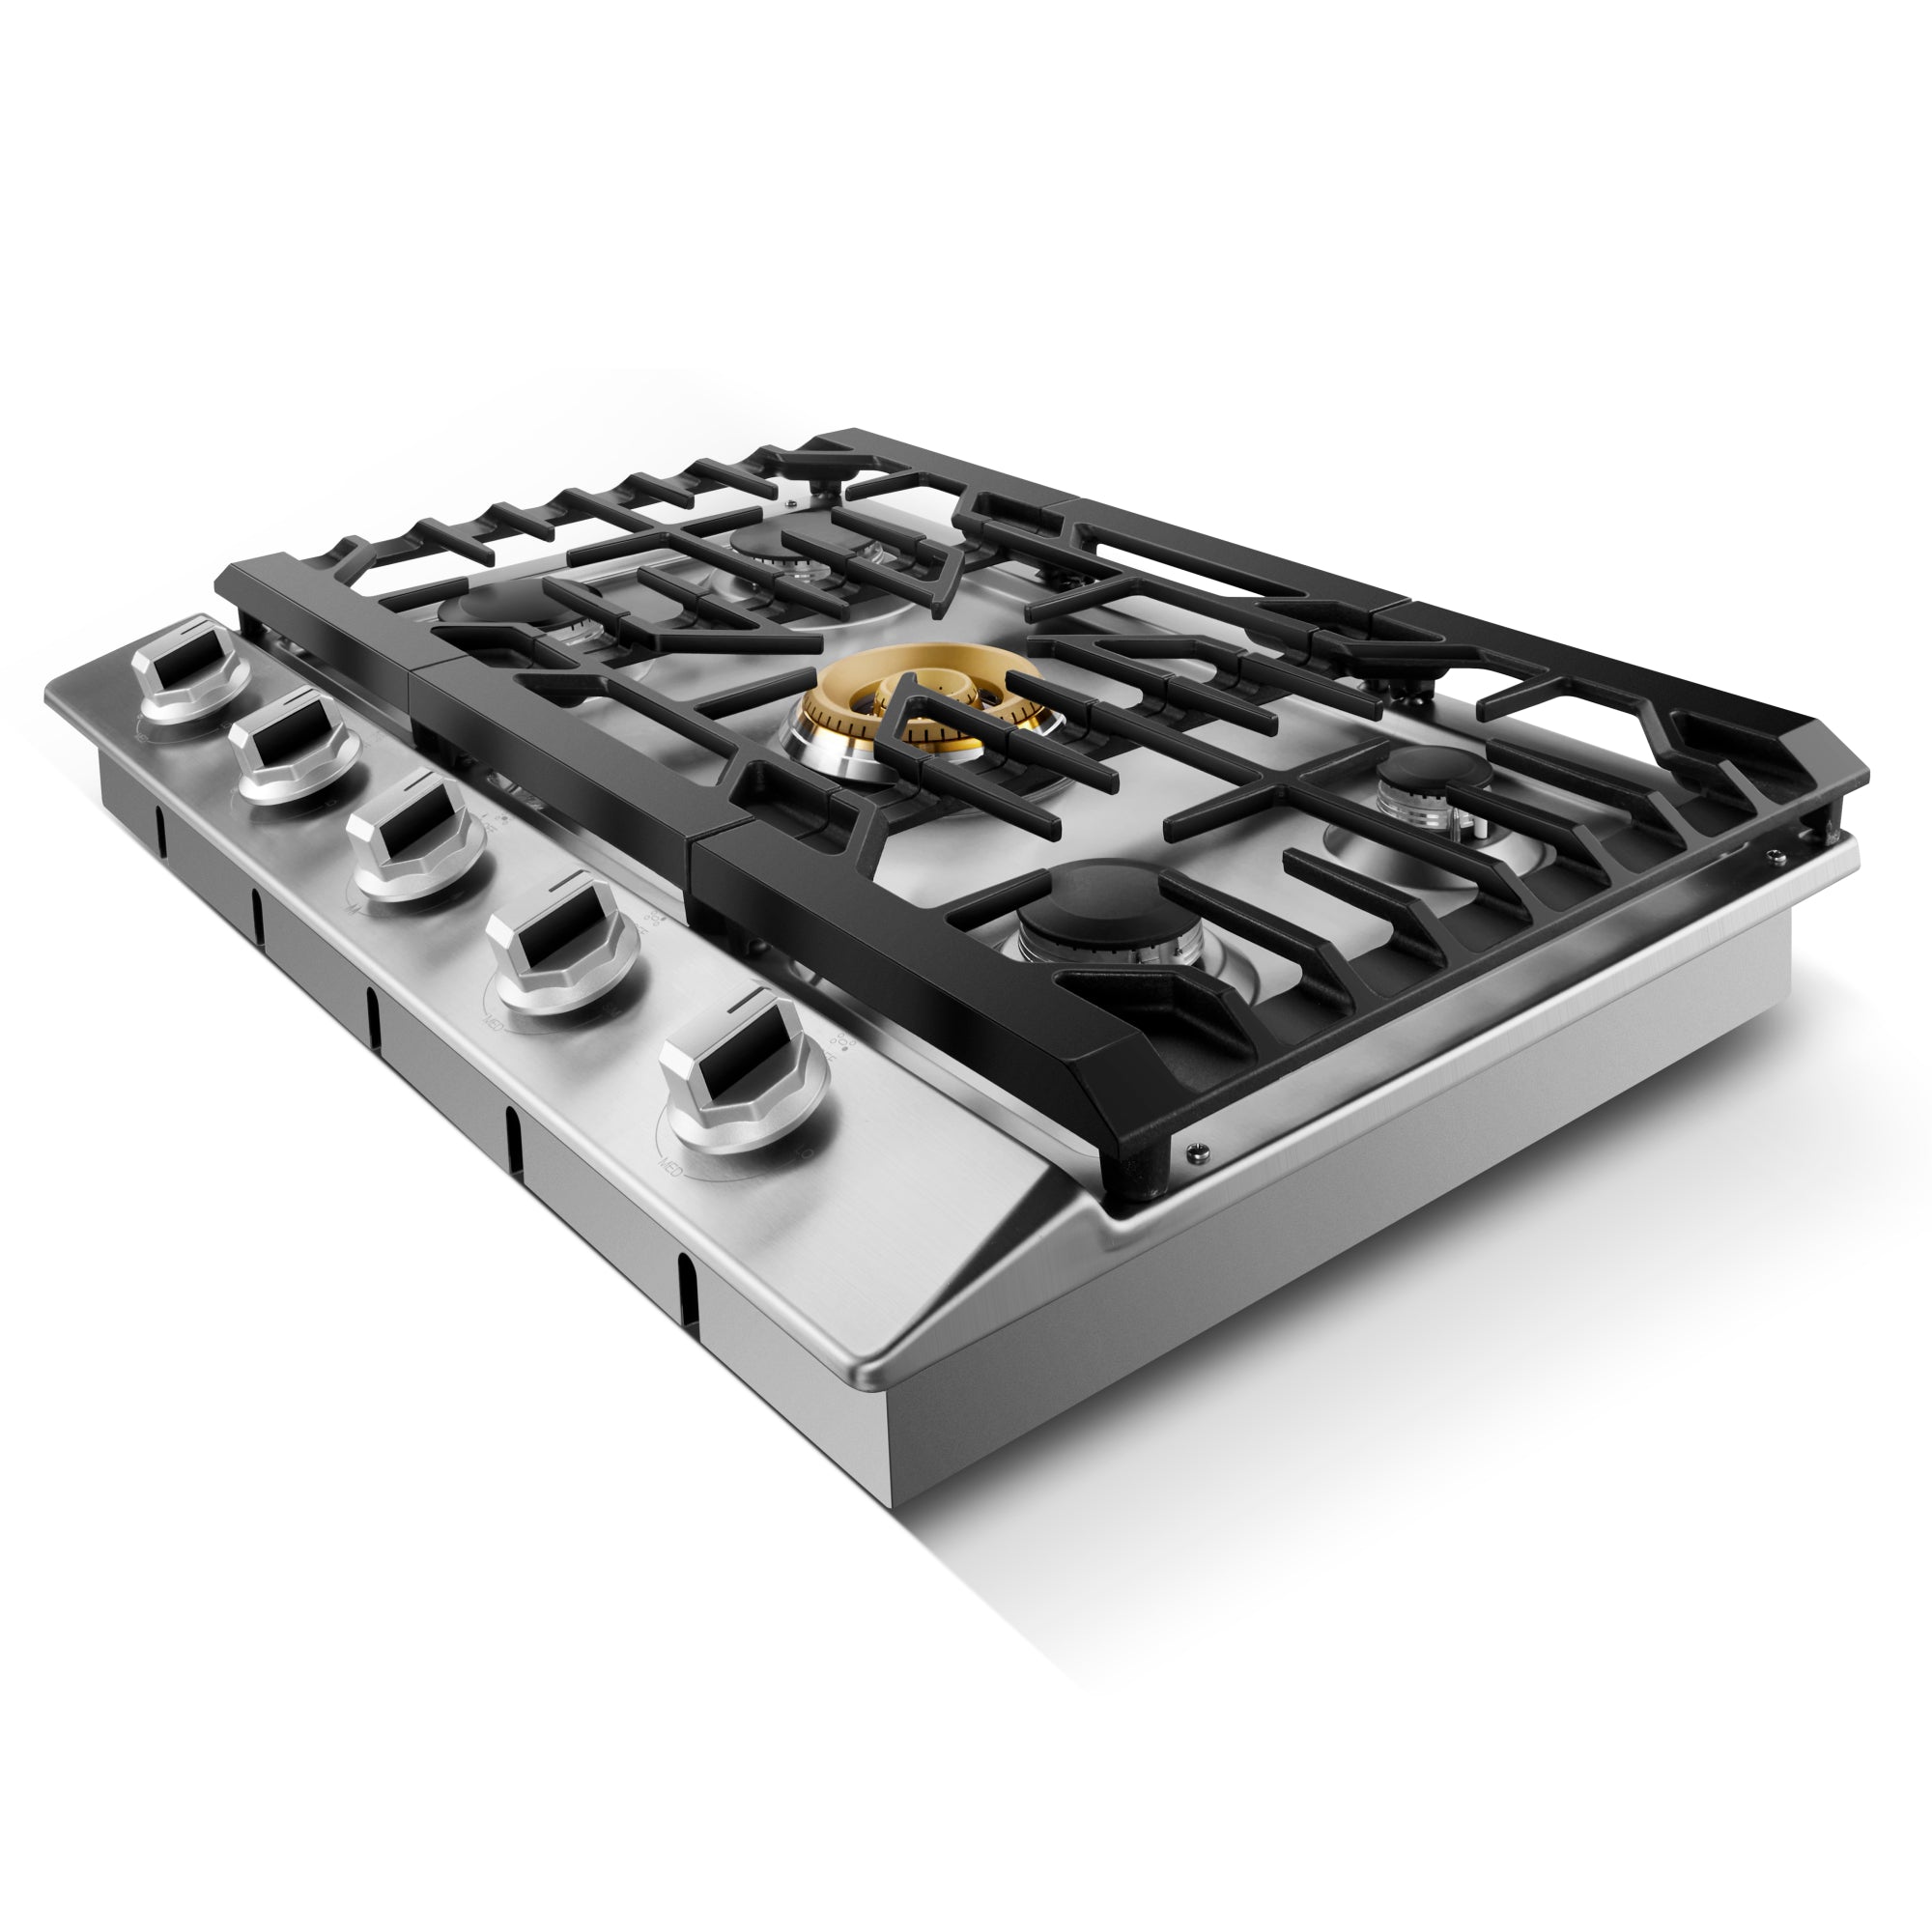 Fotile Tri-Ring Series 30 in. Gas Cooktop with 5 Burners in Stainless Steel (GLS30501)